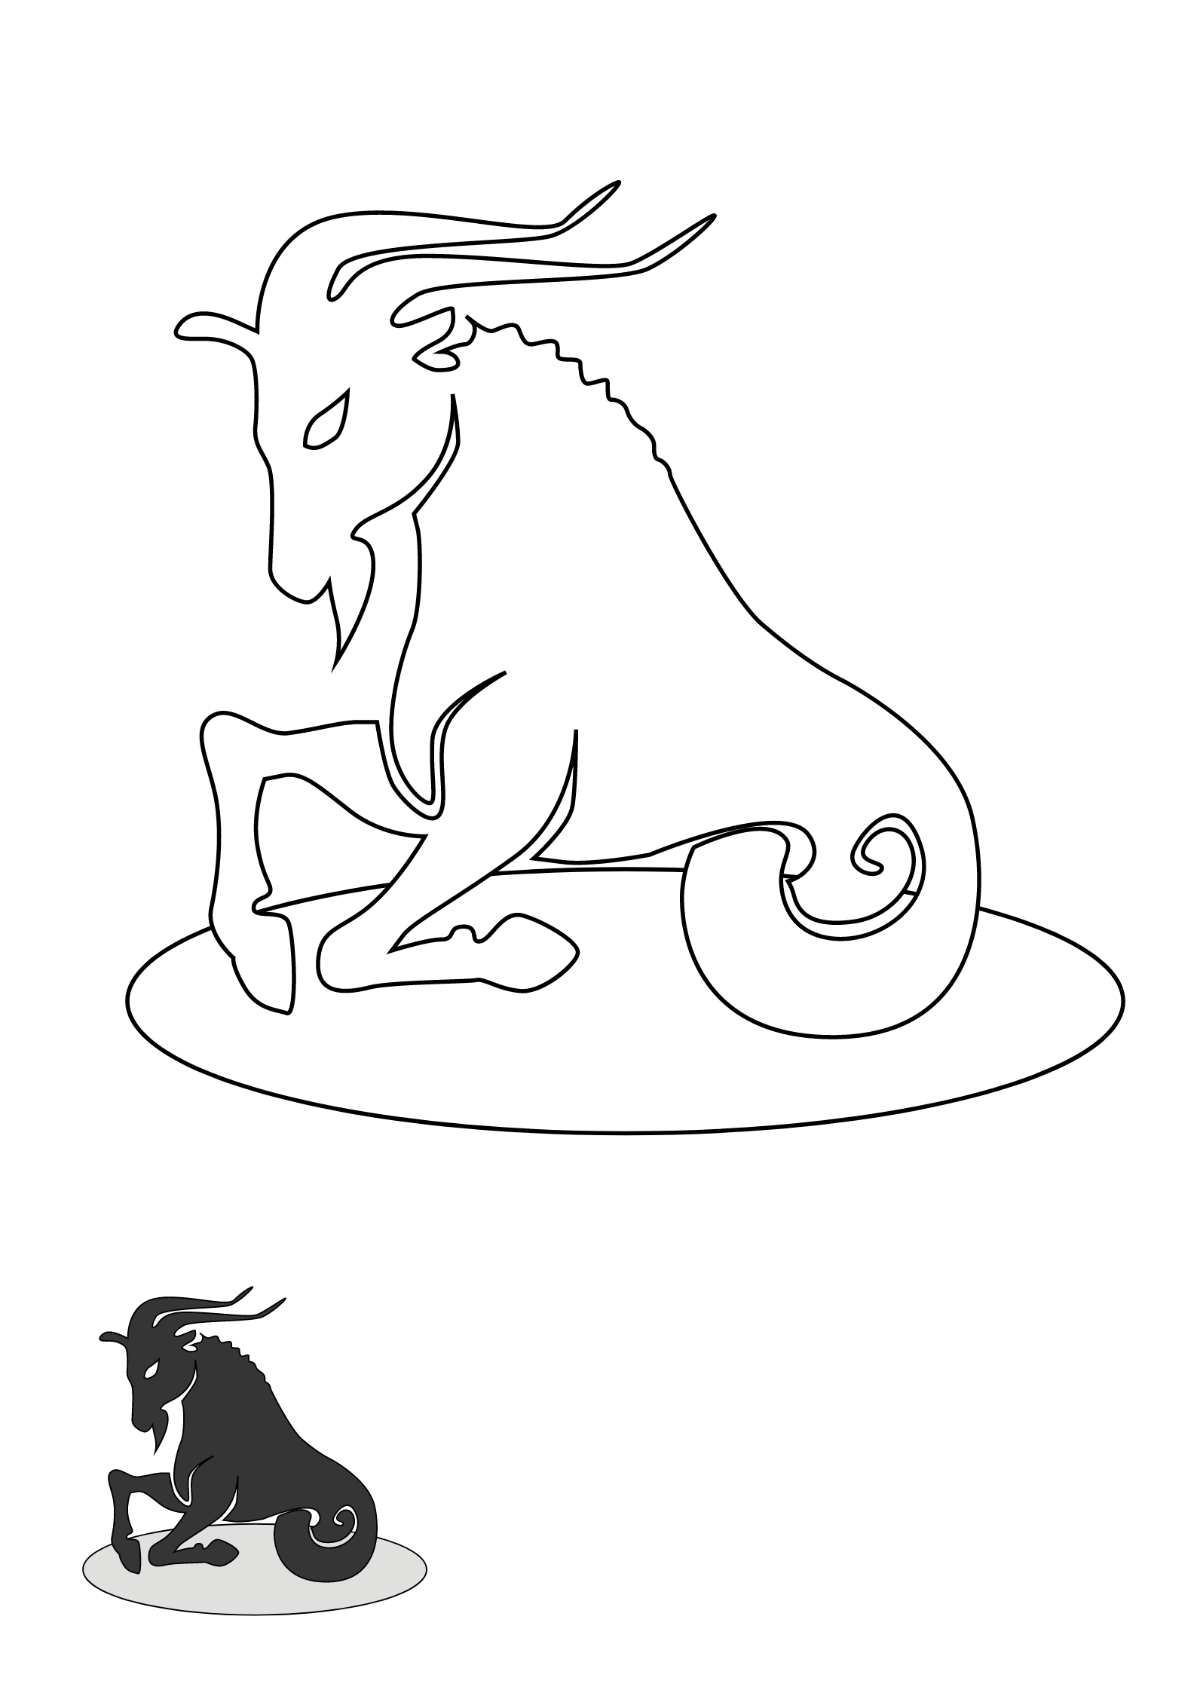 Black Capricorn coloring page Template